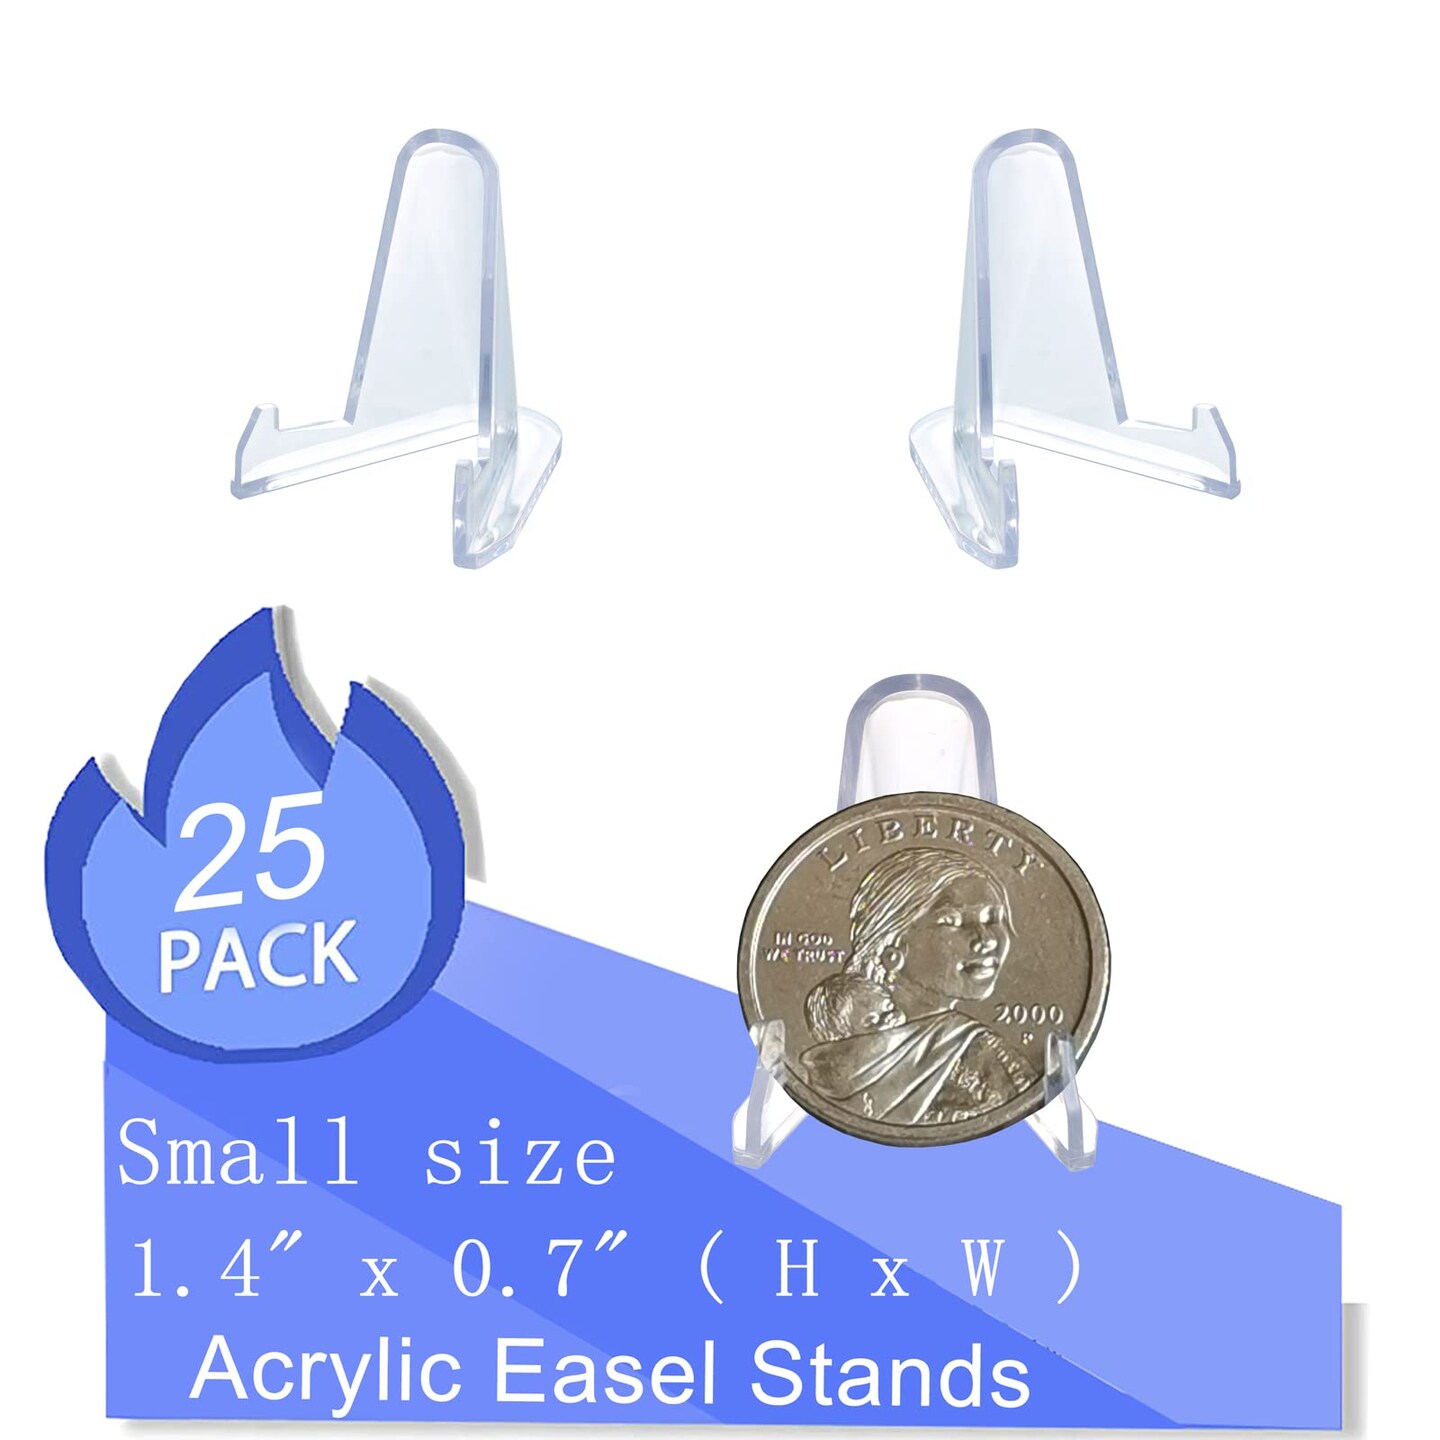 25 Packs(1.4 Inch) Acrylic Easel Stands Display Stands/Plate Stands Coin Display Easel Holder for Air-Tite Coins Pocket Watches Capsules Challenge Medals Casino Chips , Photo Display,Baseball Sports